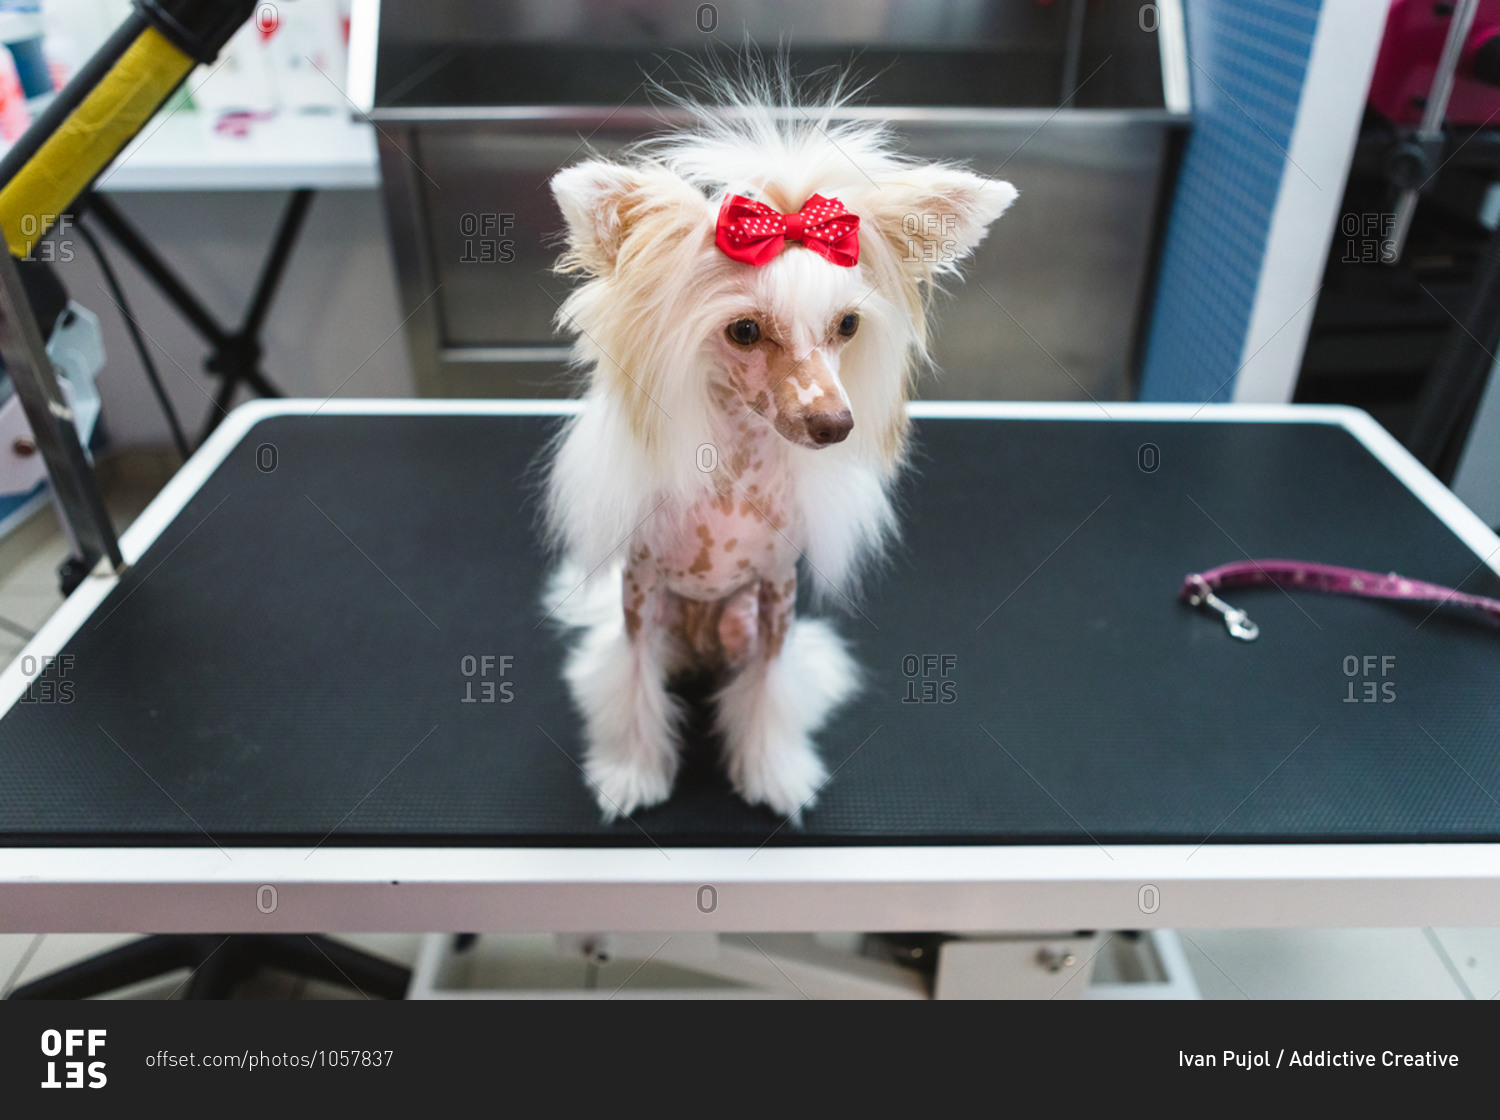 From above of cute attentive purebred dog with spotted skin and white fur with bow on head on grooming table